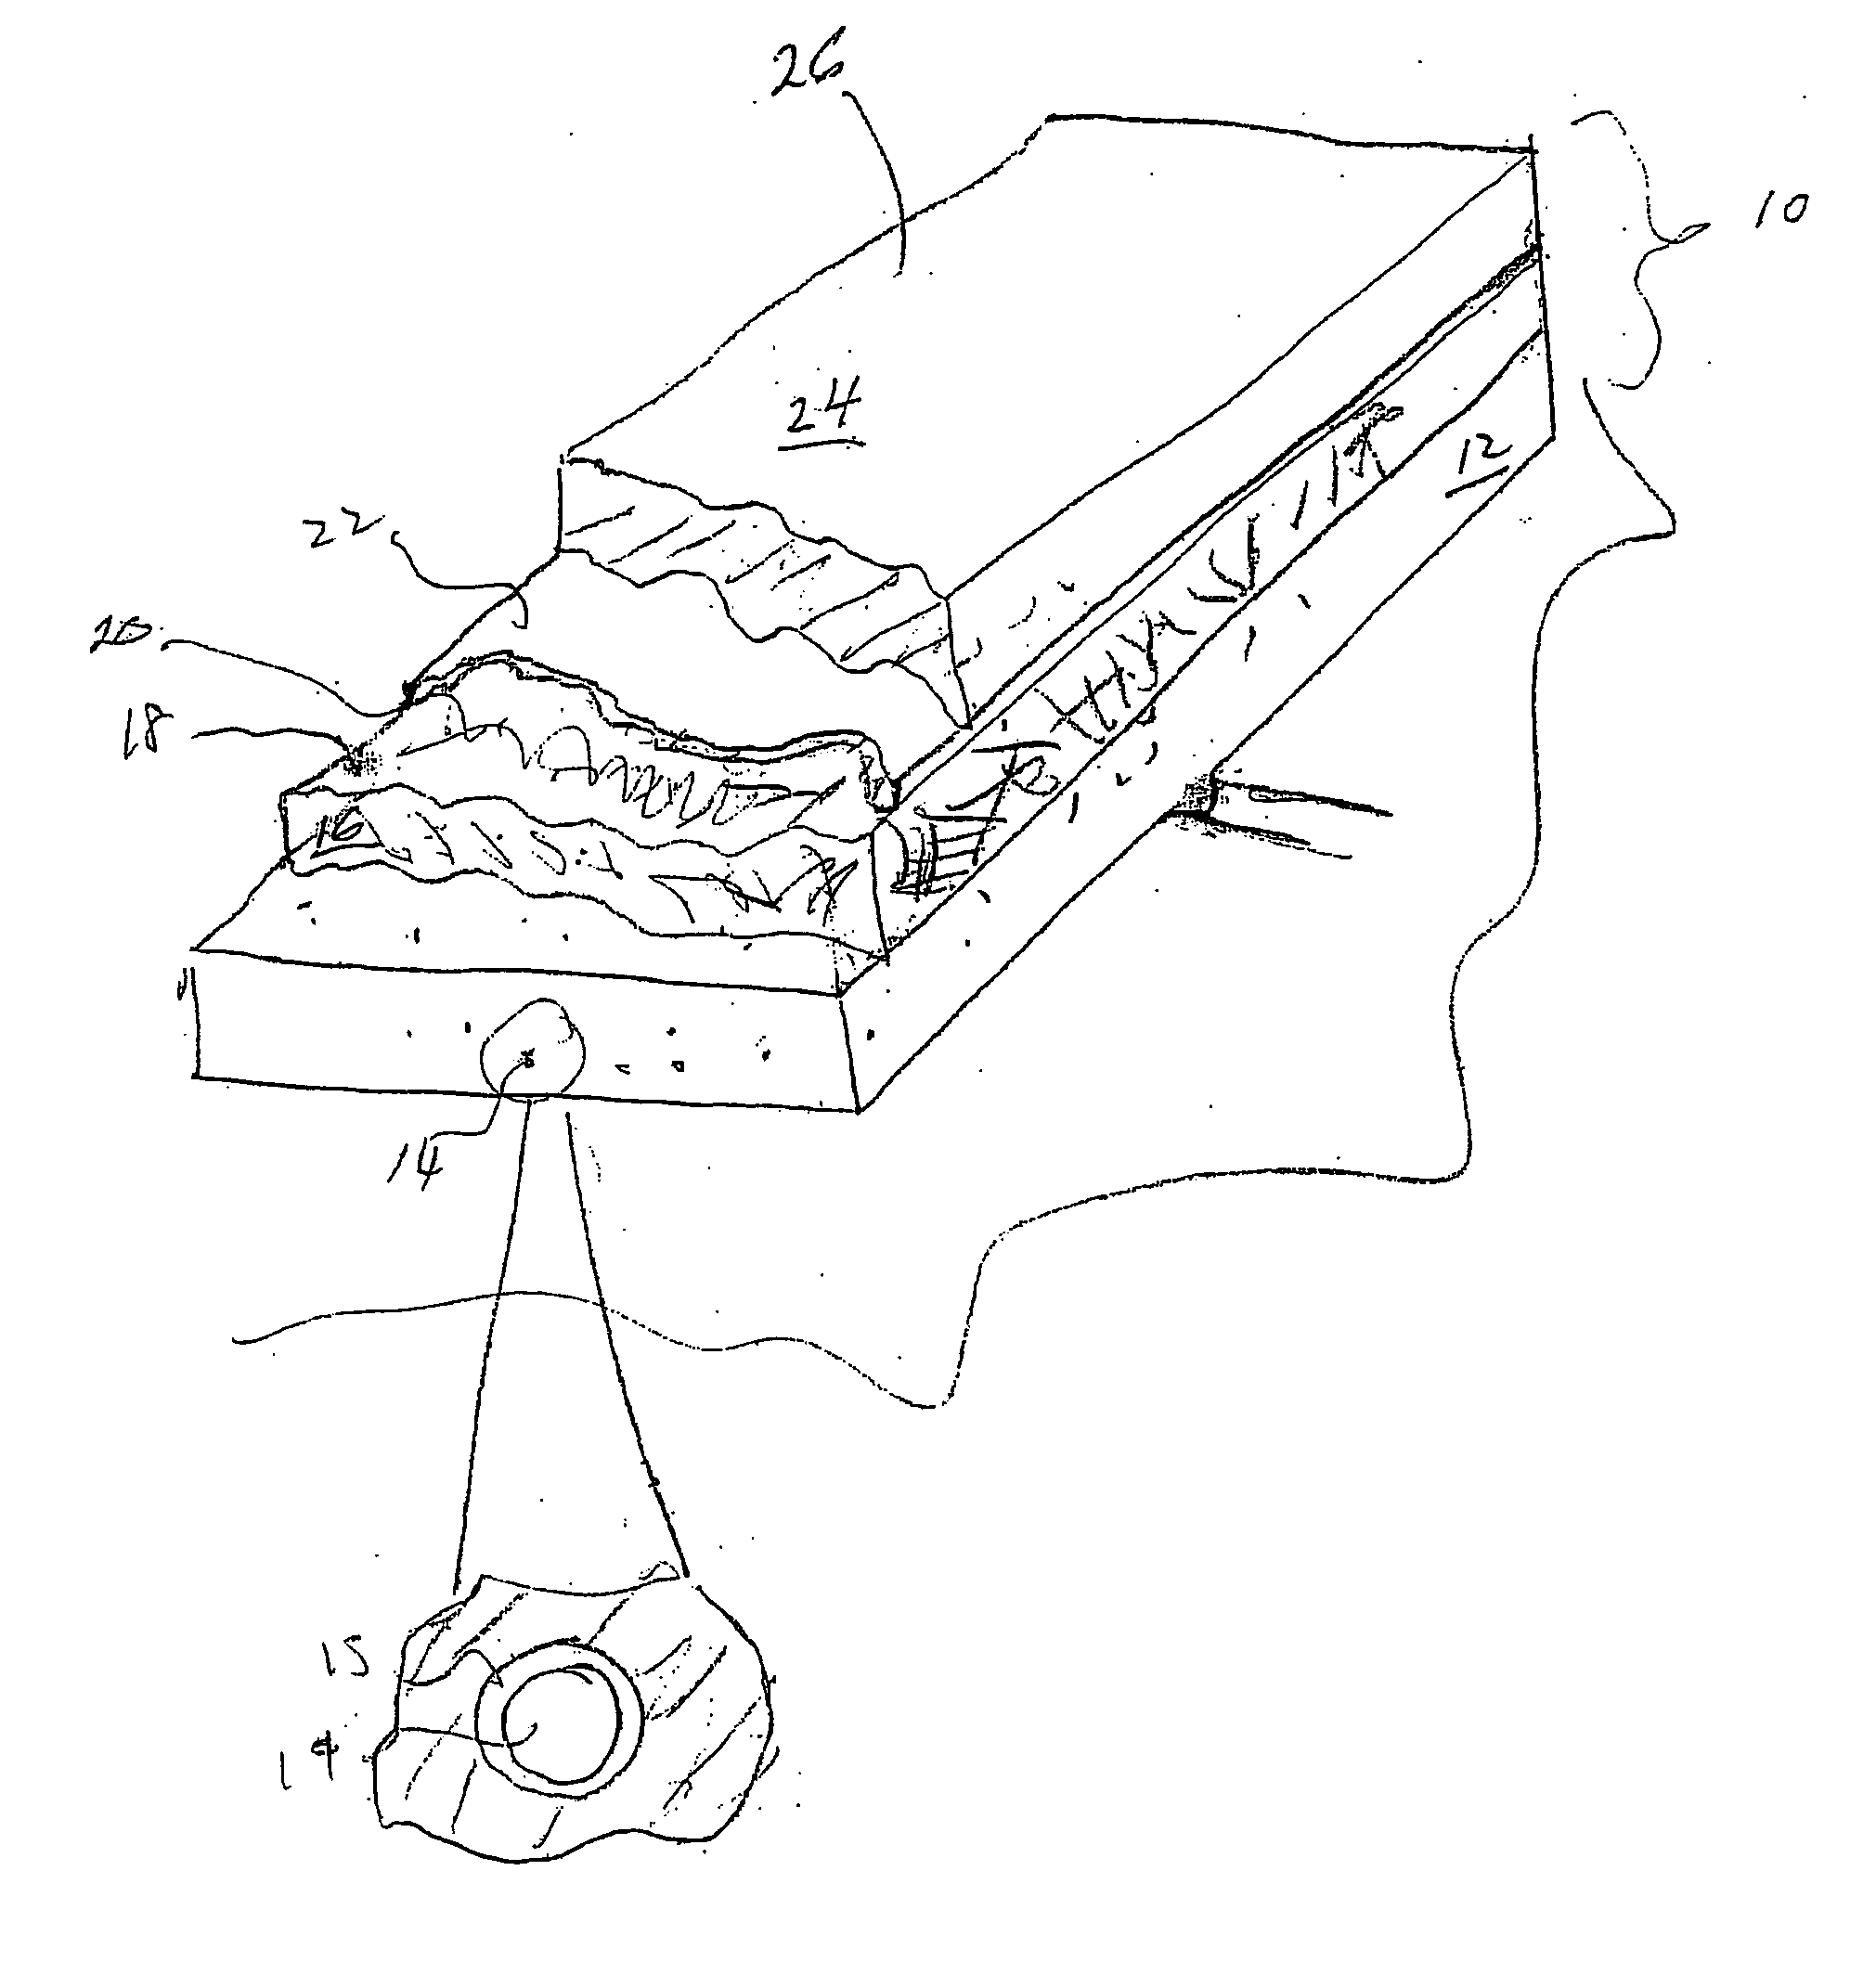 Roofing system